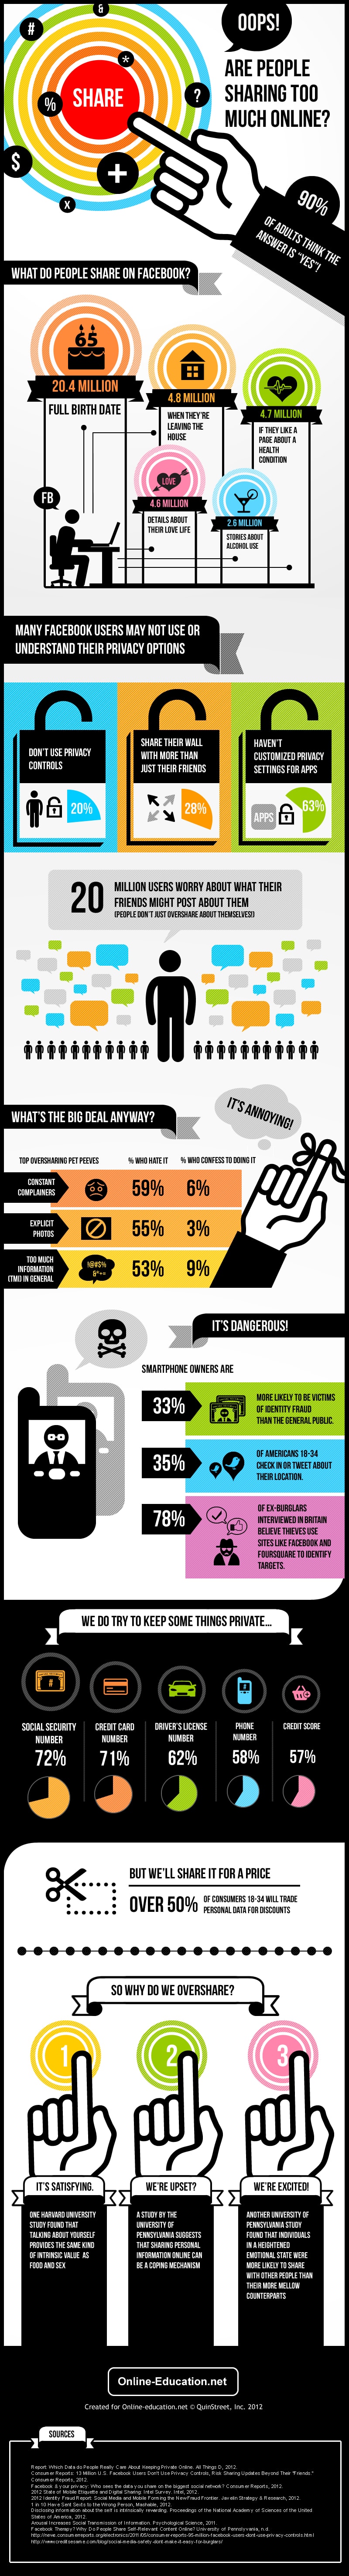 How We Might Share Too Much Online [Infographic]